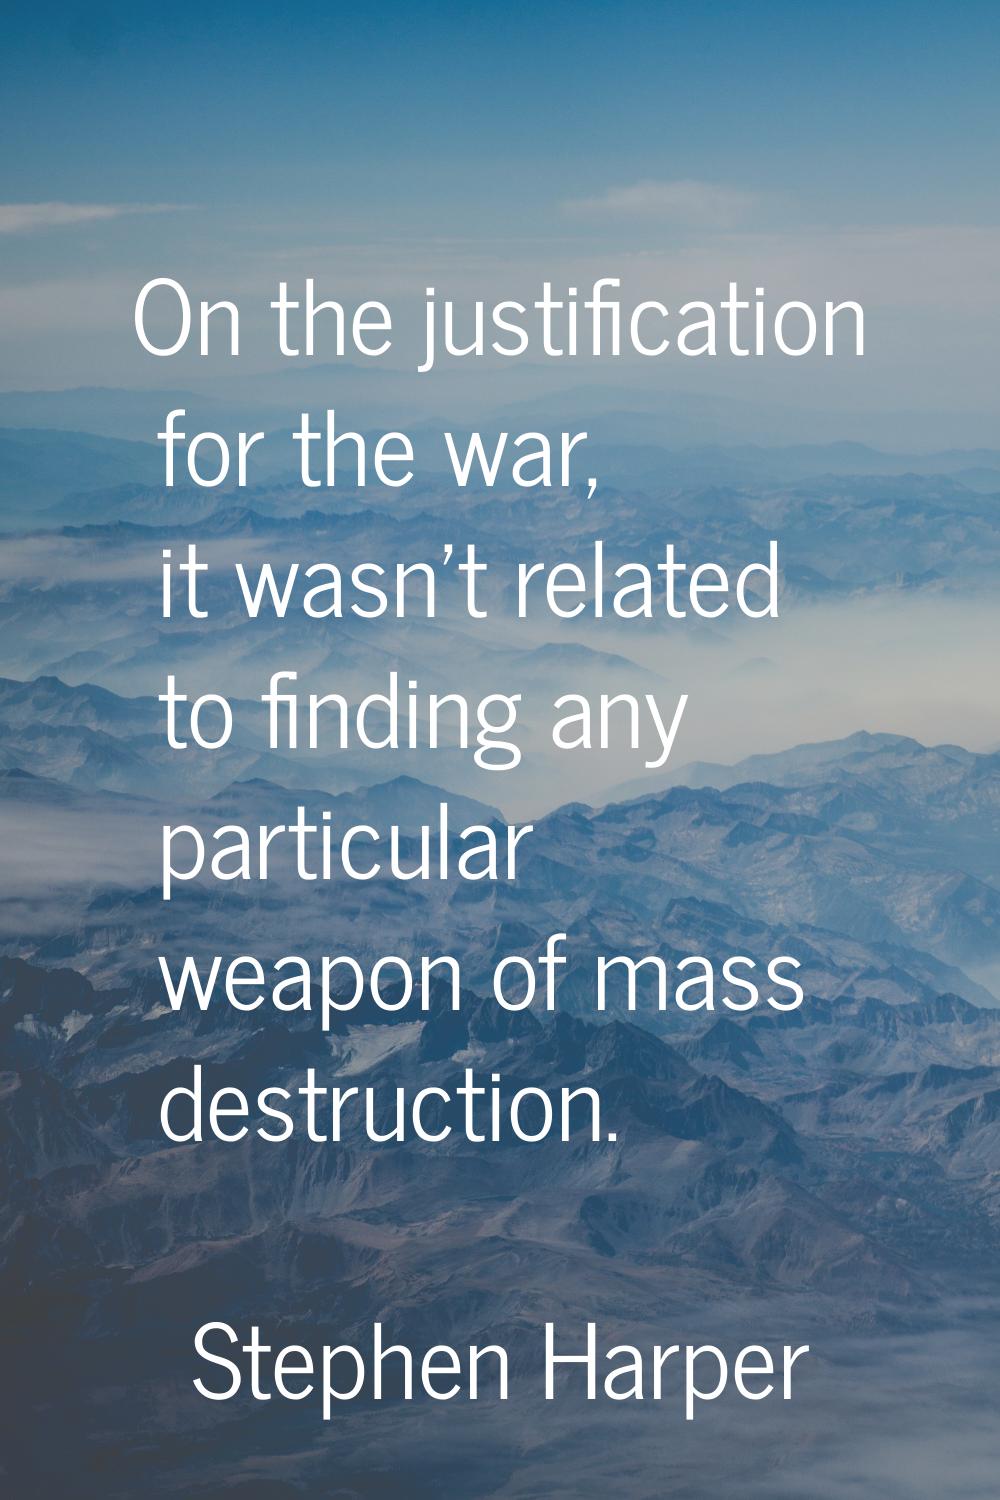 On the justification for the war, it wasn't related to finding any particular weapon of mass destru